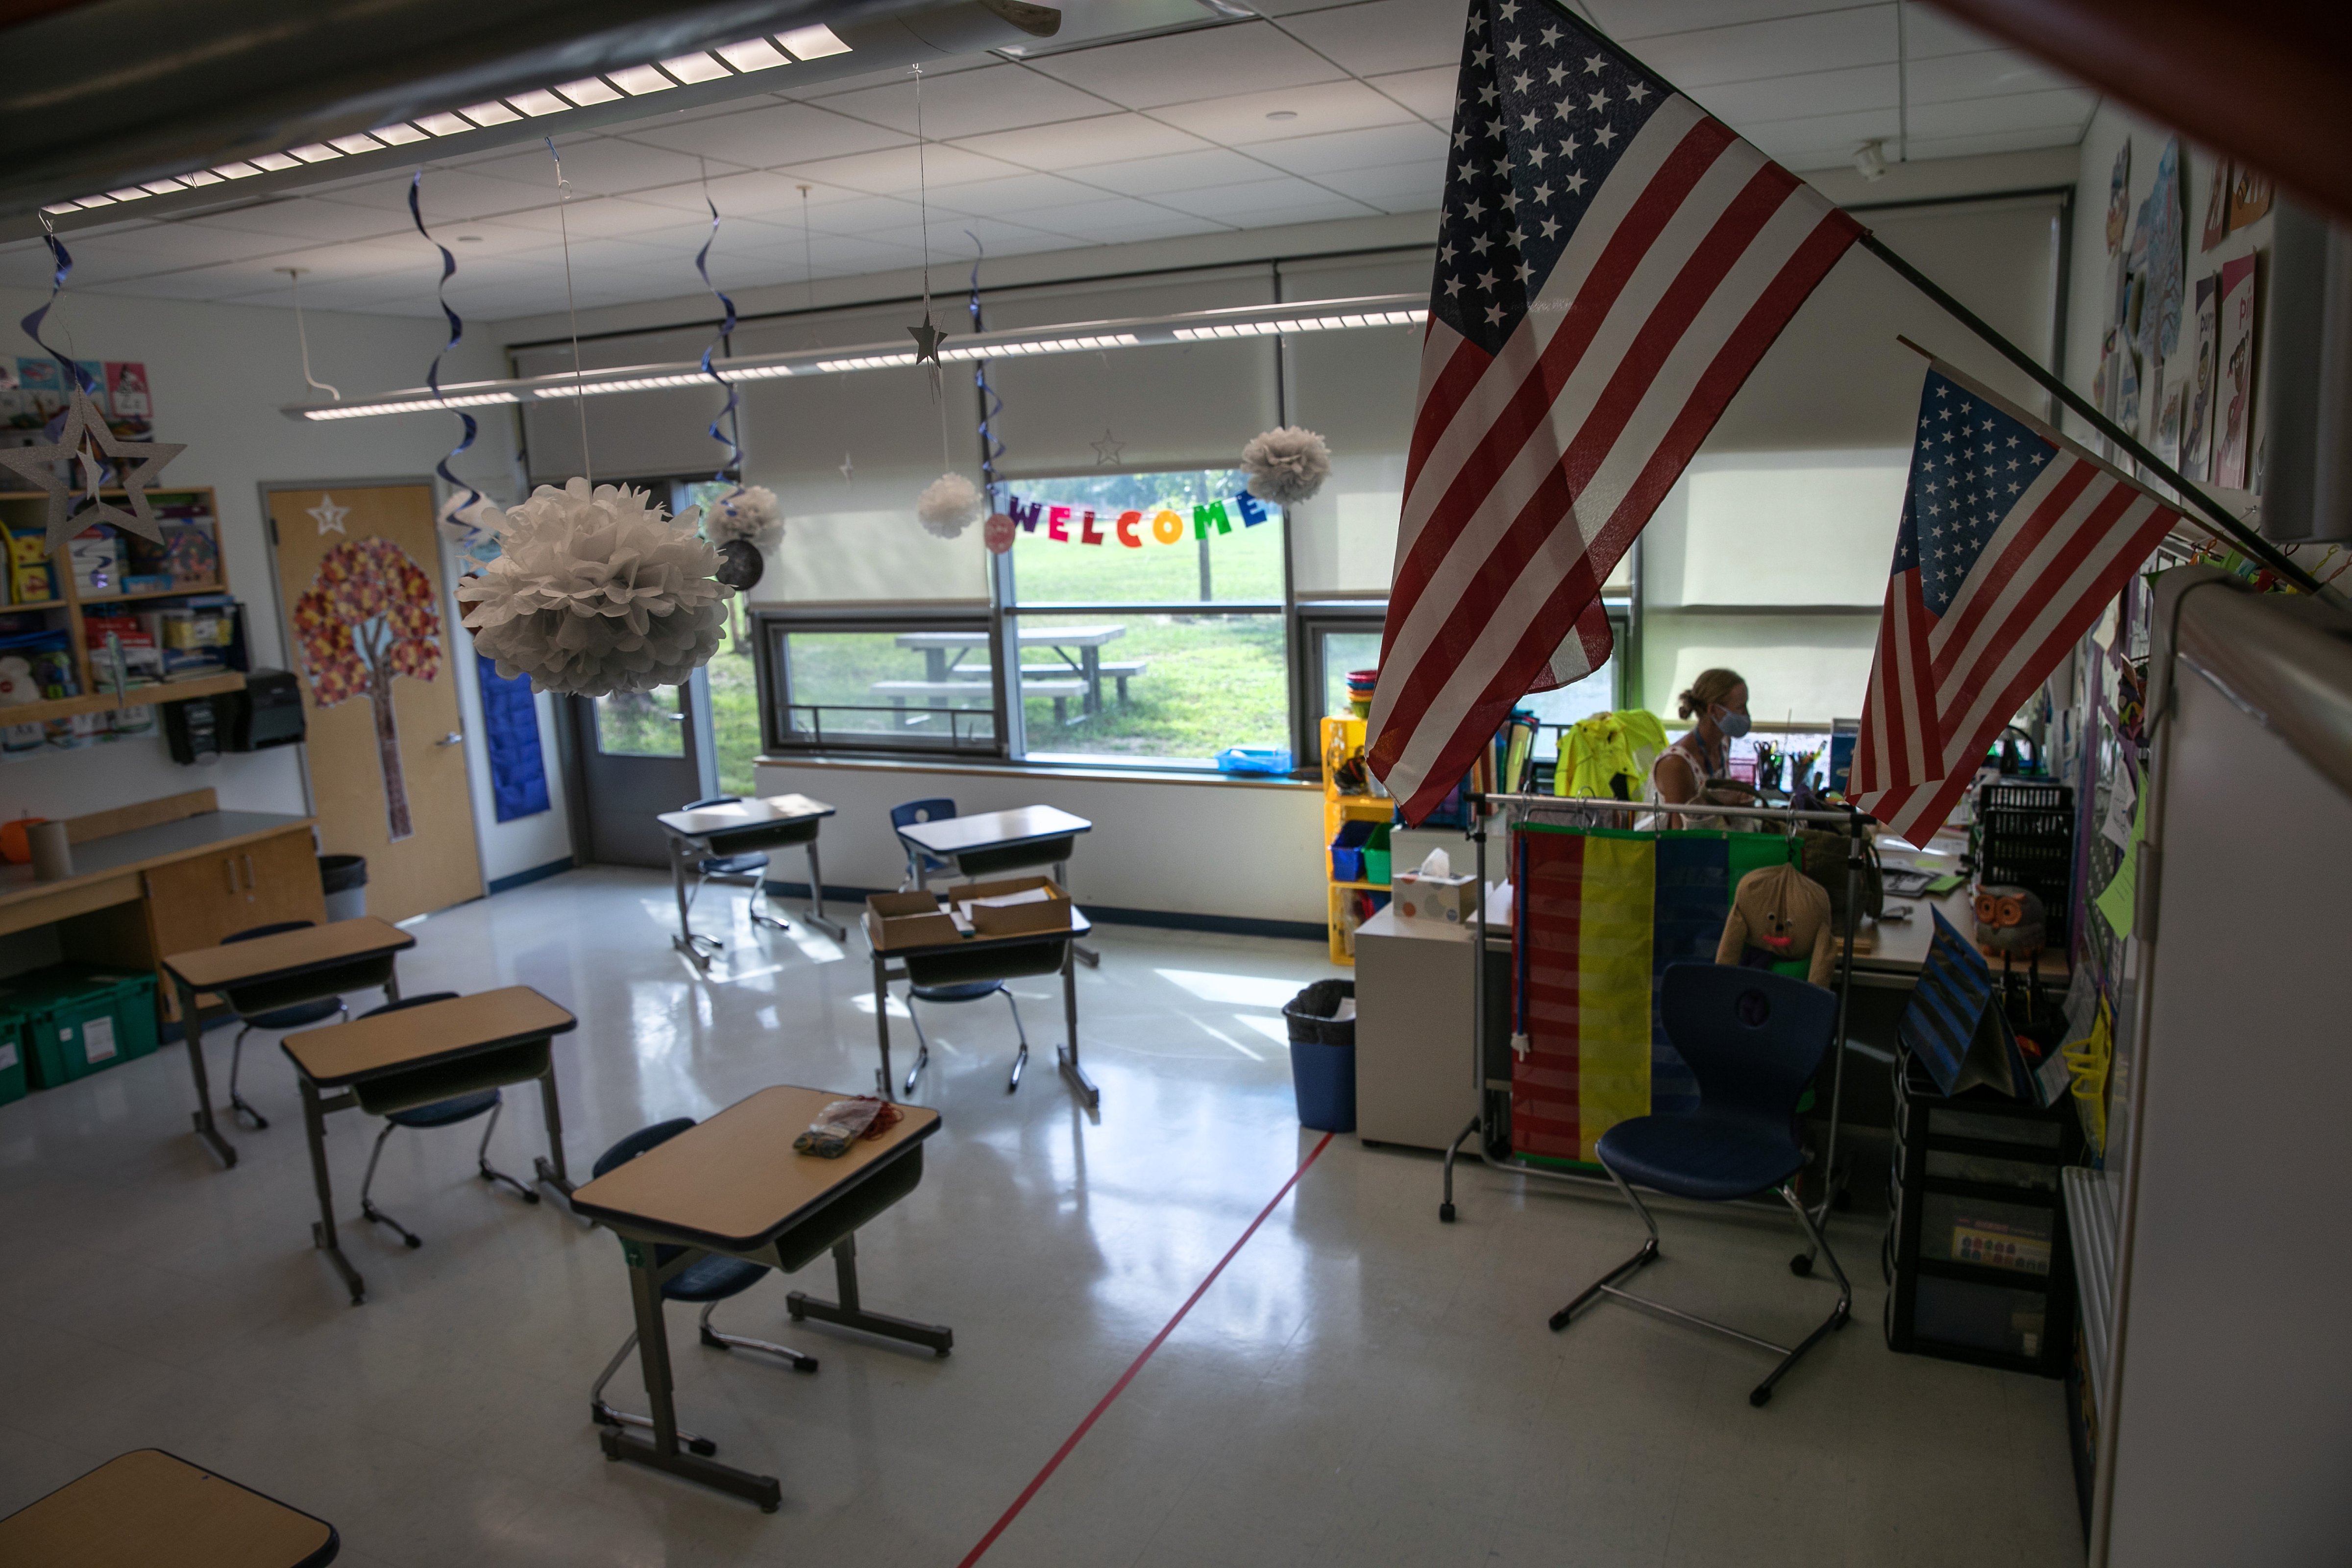 Desks sit socially distanced in a kindergarten classroom ahead of the fall semester at Rogers International School on Sept. 3, in Stamford, Conn. (John Moore—Getty Images)